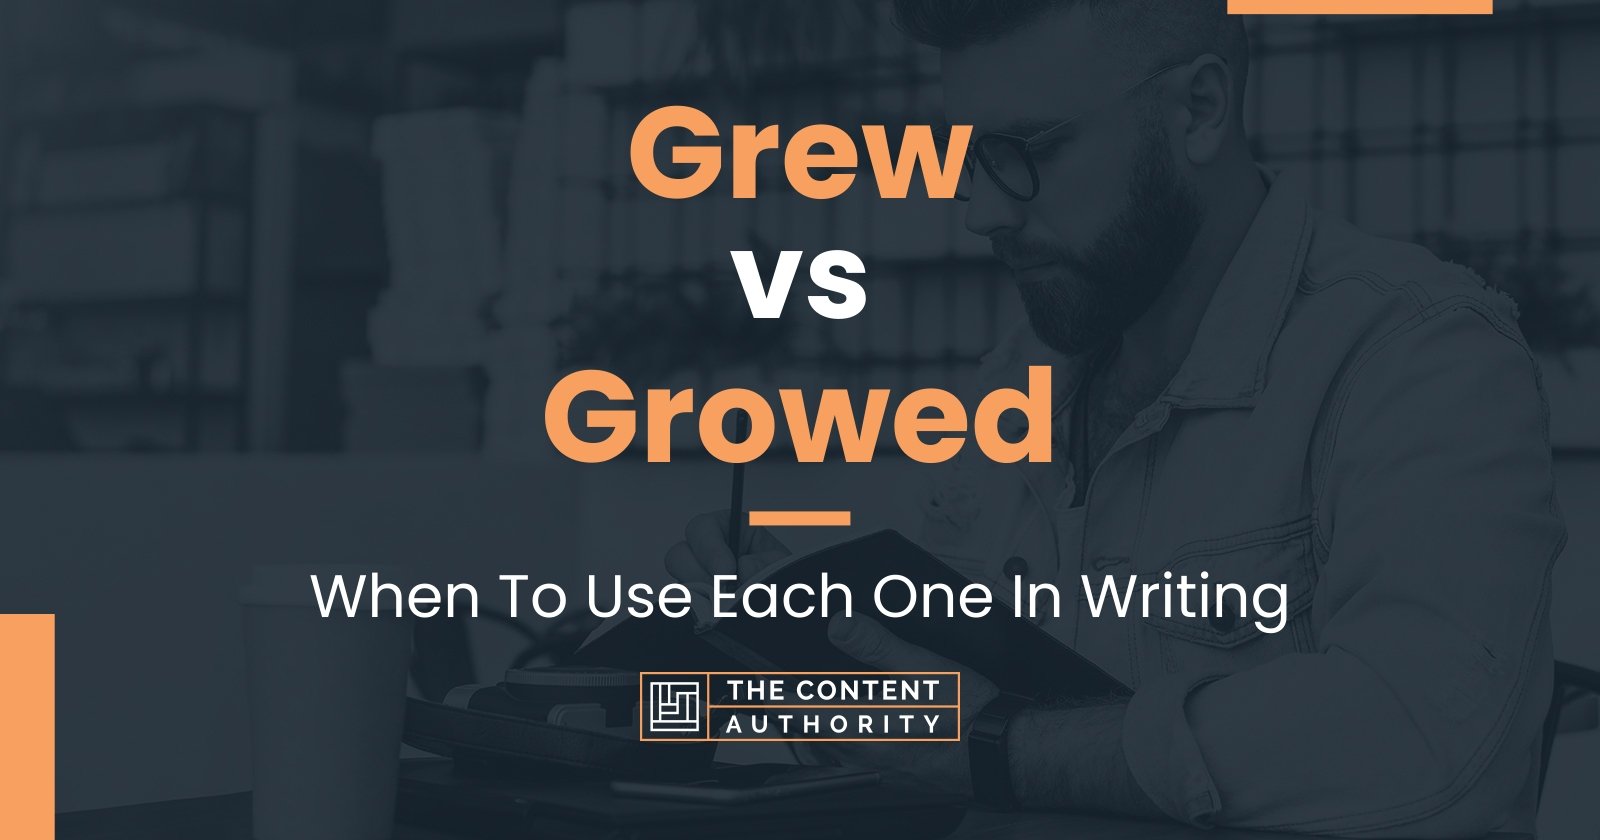 Grew vs Growed: When To Use Each One In Writing